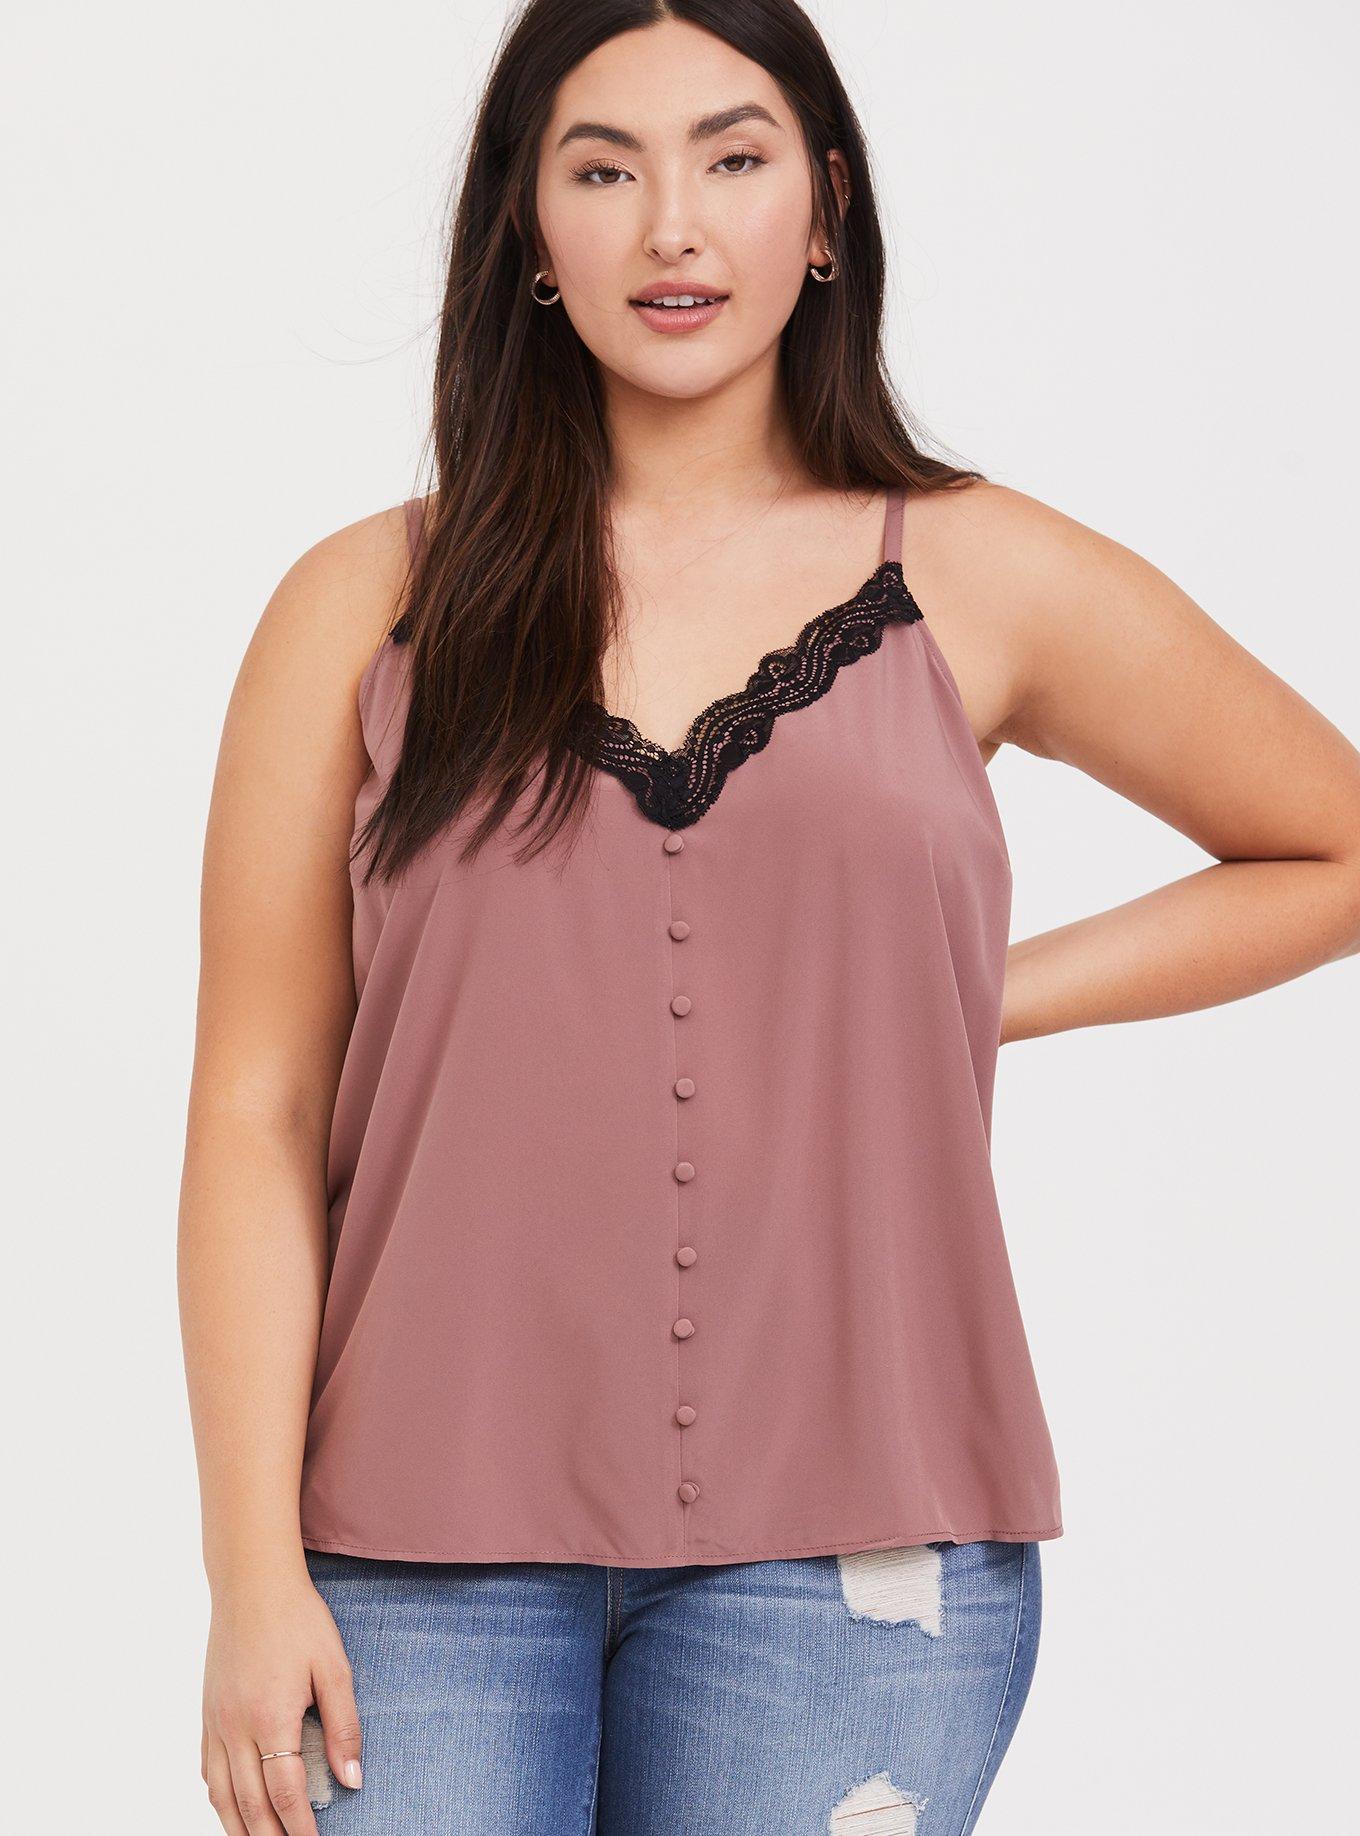 Women's Lace Casual Camisole Cami Crop Tank Tops Lingerie Bra, Shop Today.  Get it Tomorrow!